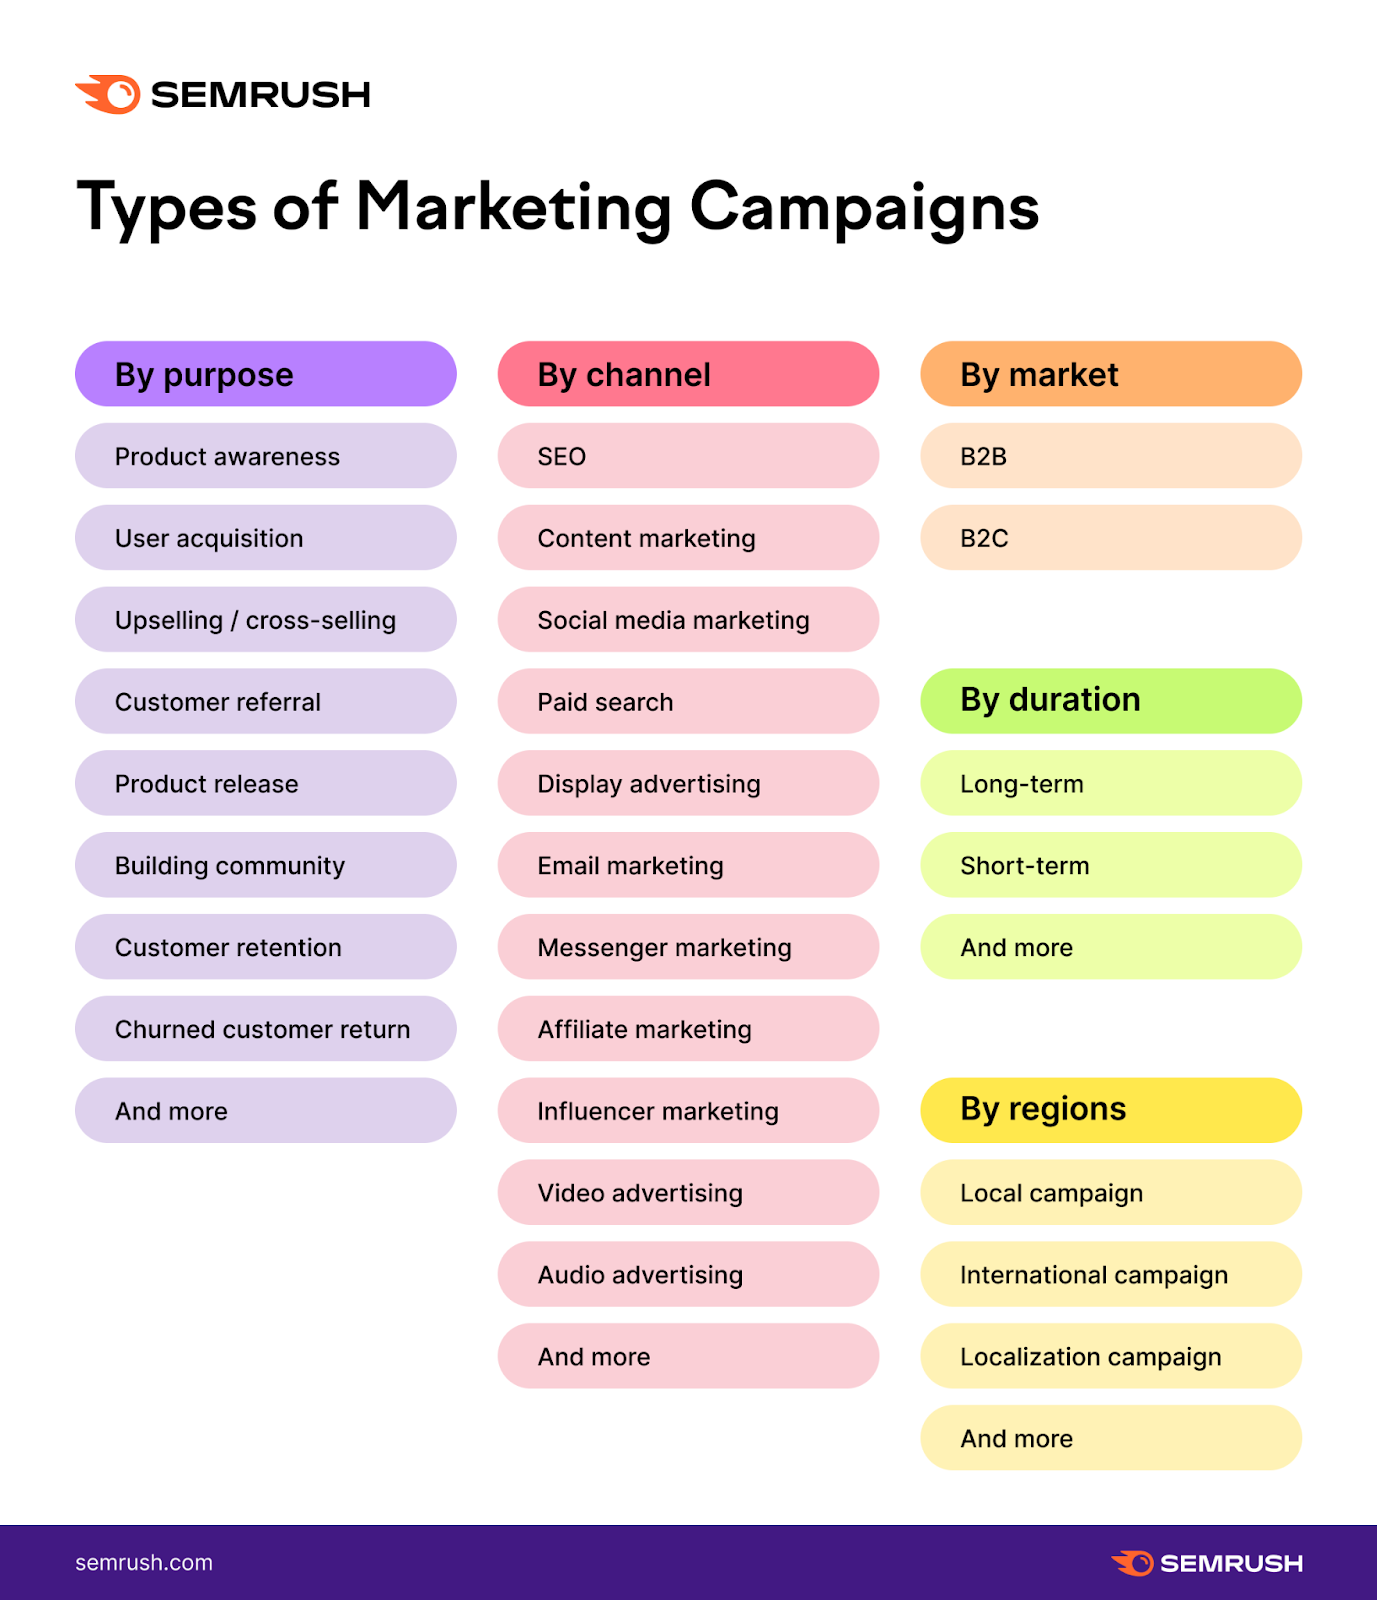 Types of marketing campaigns, by purpose, channel, market, duration, and regions